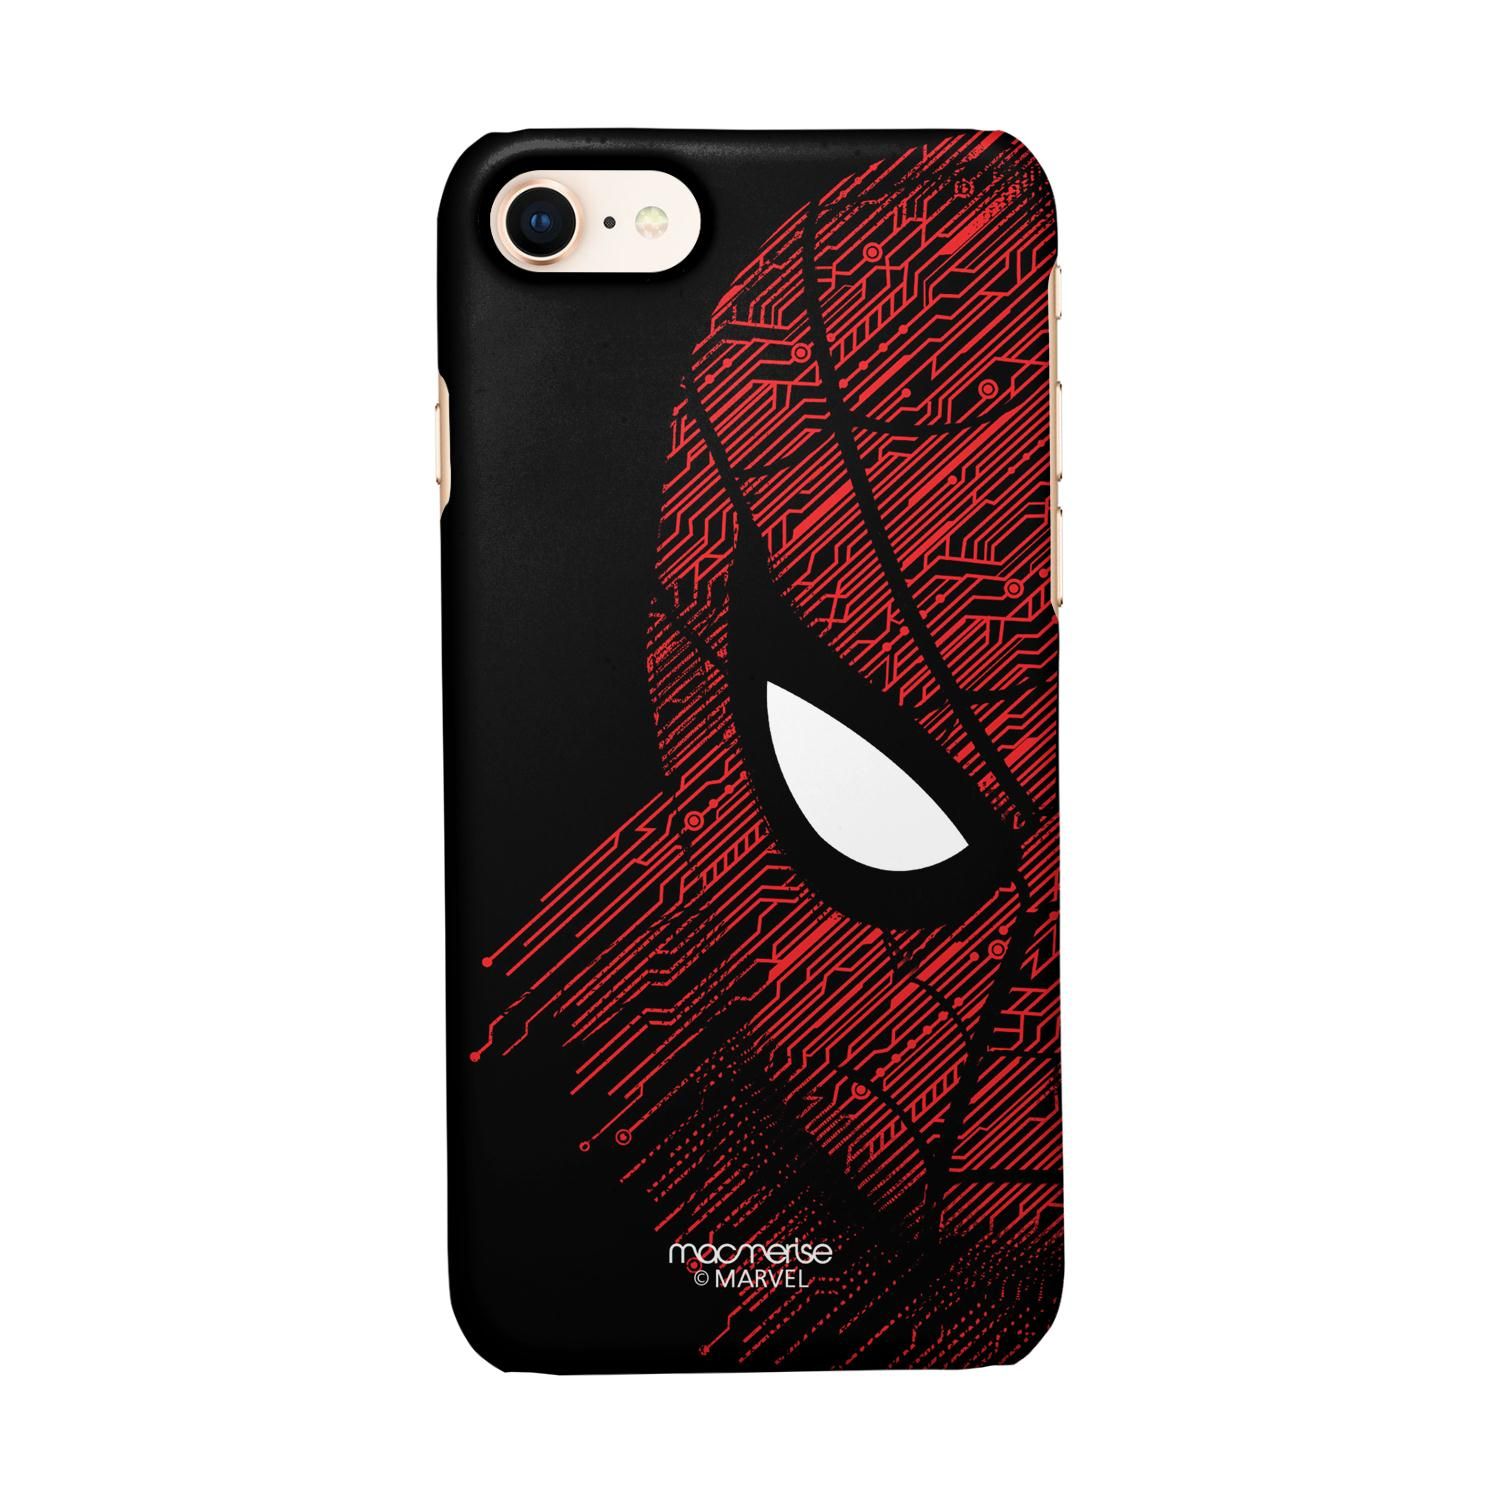 Buy Sketch Out Spiderman - Sleek Phone Case for iPhone 7 Online